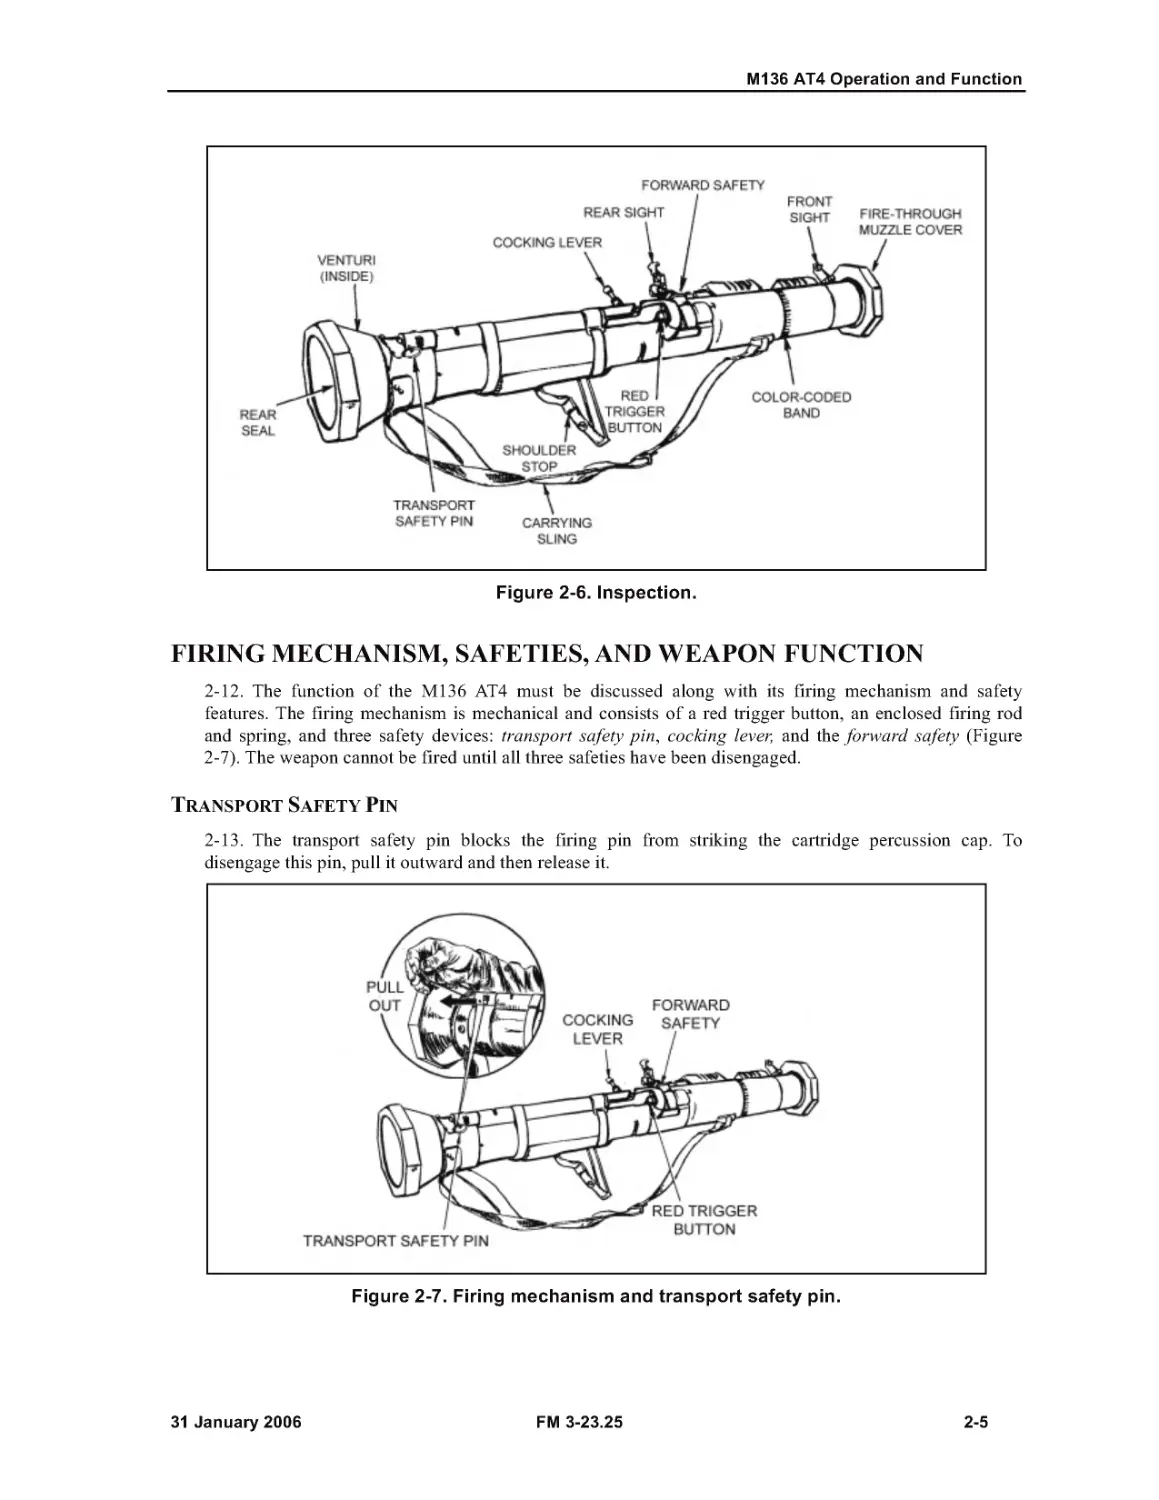 Figure 2-6. Inspection.
Figure 2-7. Firing mechanism and transport safety pin.
FIRING MECHANISM, SAFETIES, AND WEAPON FUNCTION